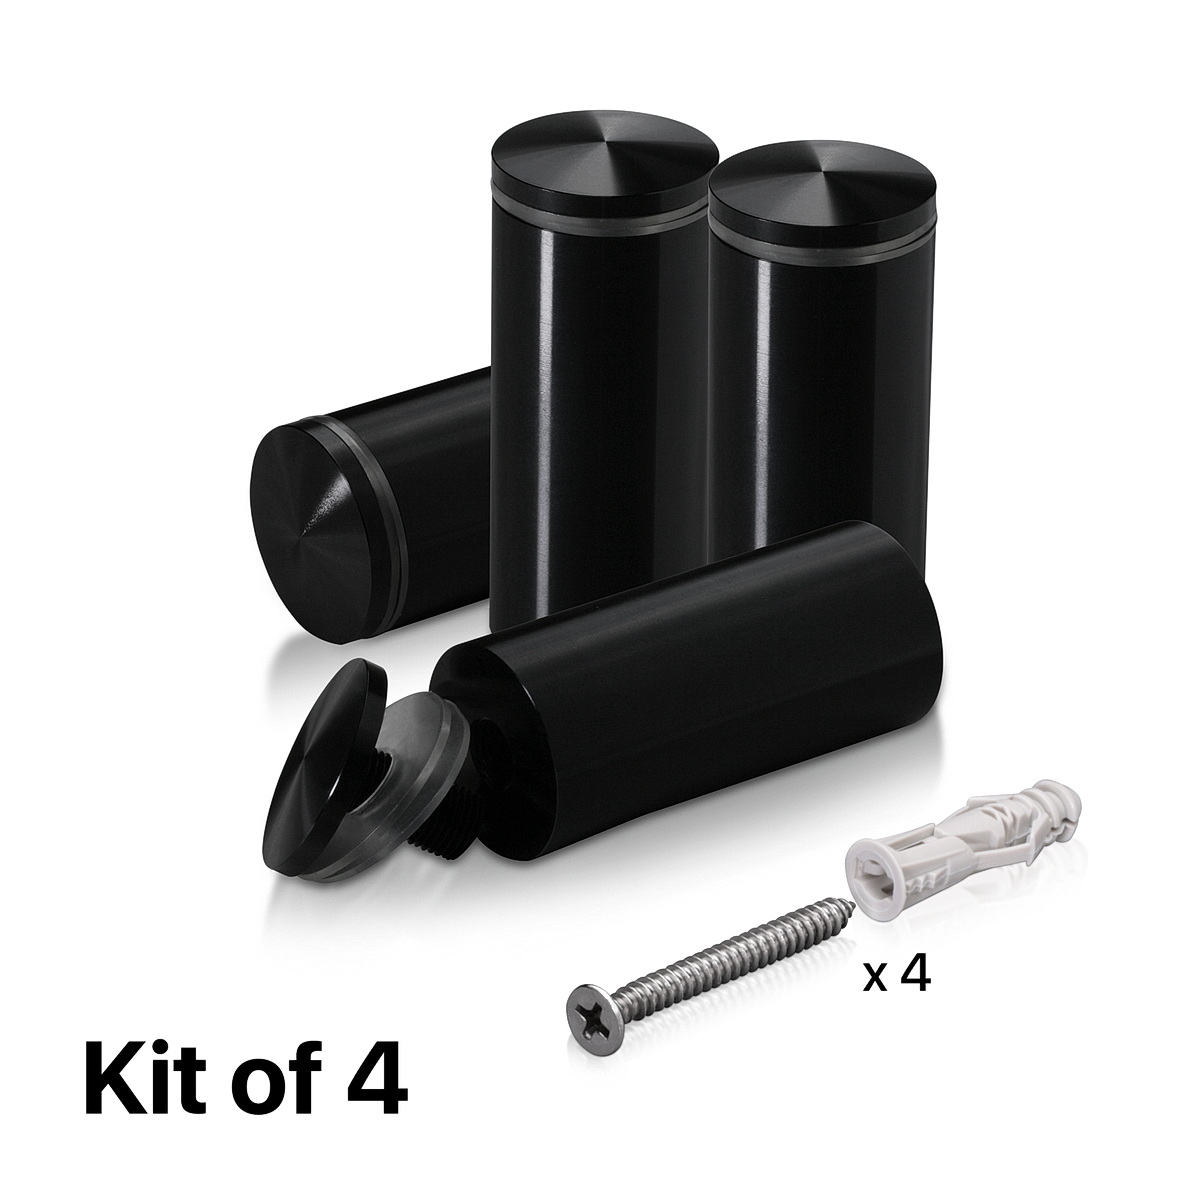 (Set of 4) 1-1/4'' Diameter X 2-1/2'' Barrel Length, Aluminum Rounded Head Standoffs, Black Anodized Finish Standoff with (4) 2216Z Screws and (4) LANC1 Anchors for concrete or drywall (For Inside / Outside use) [Required Material Hole Size: 7/16'']